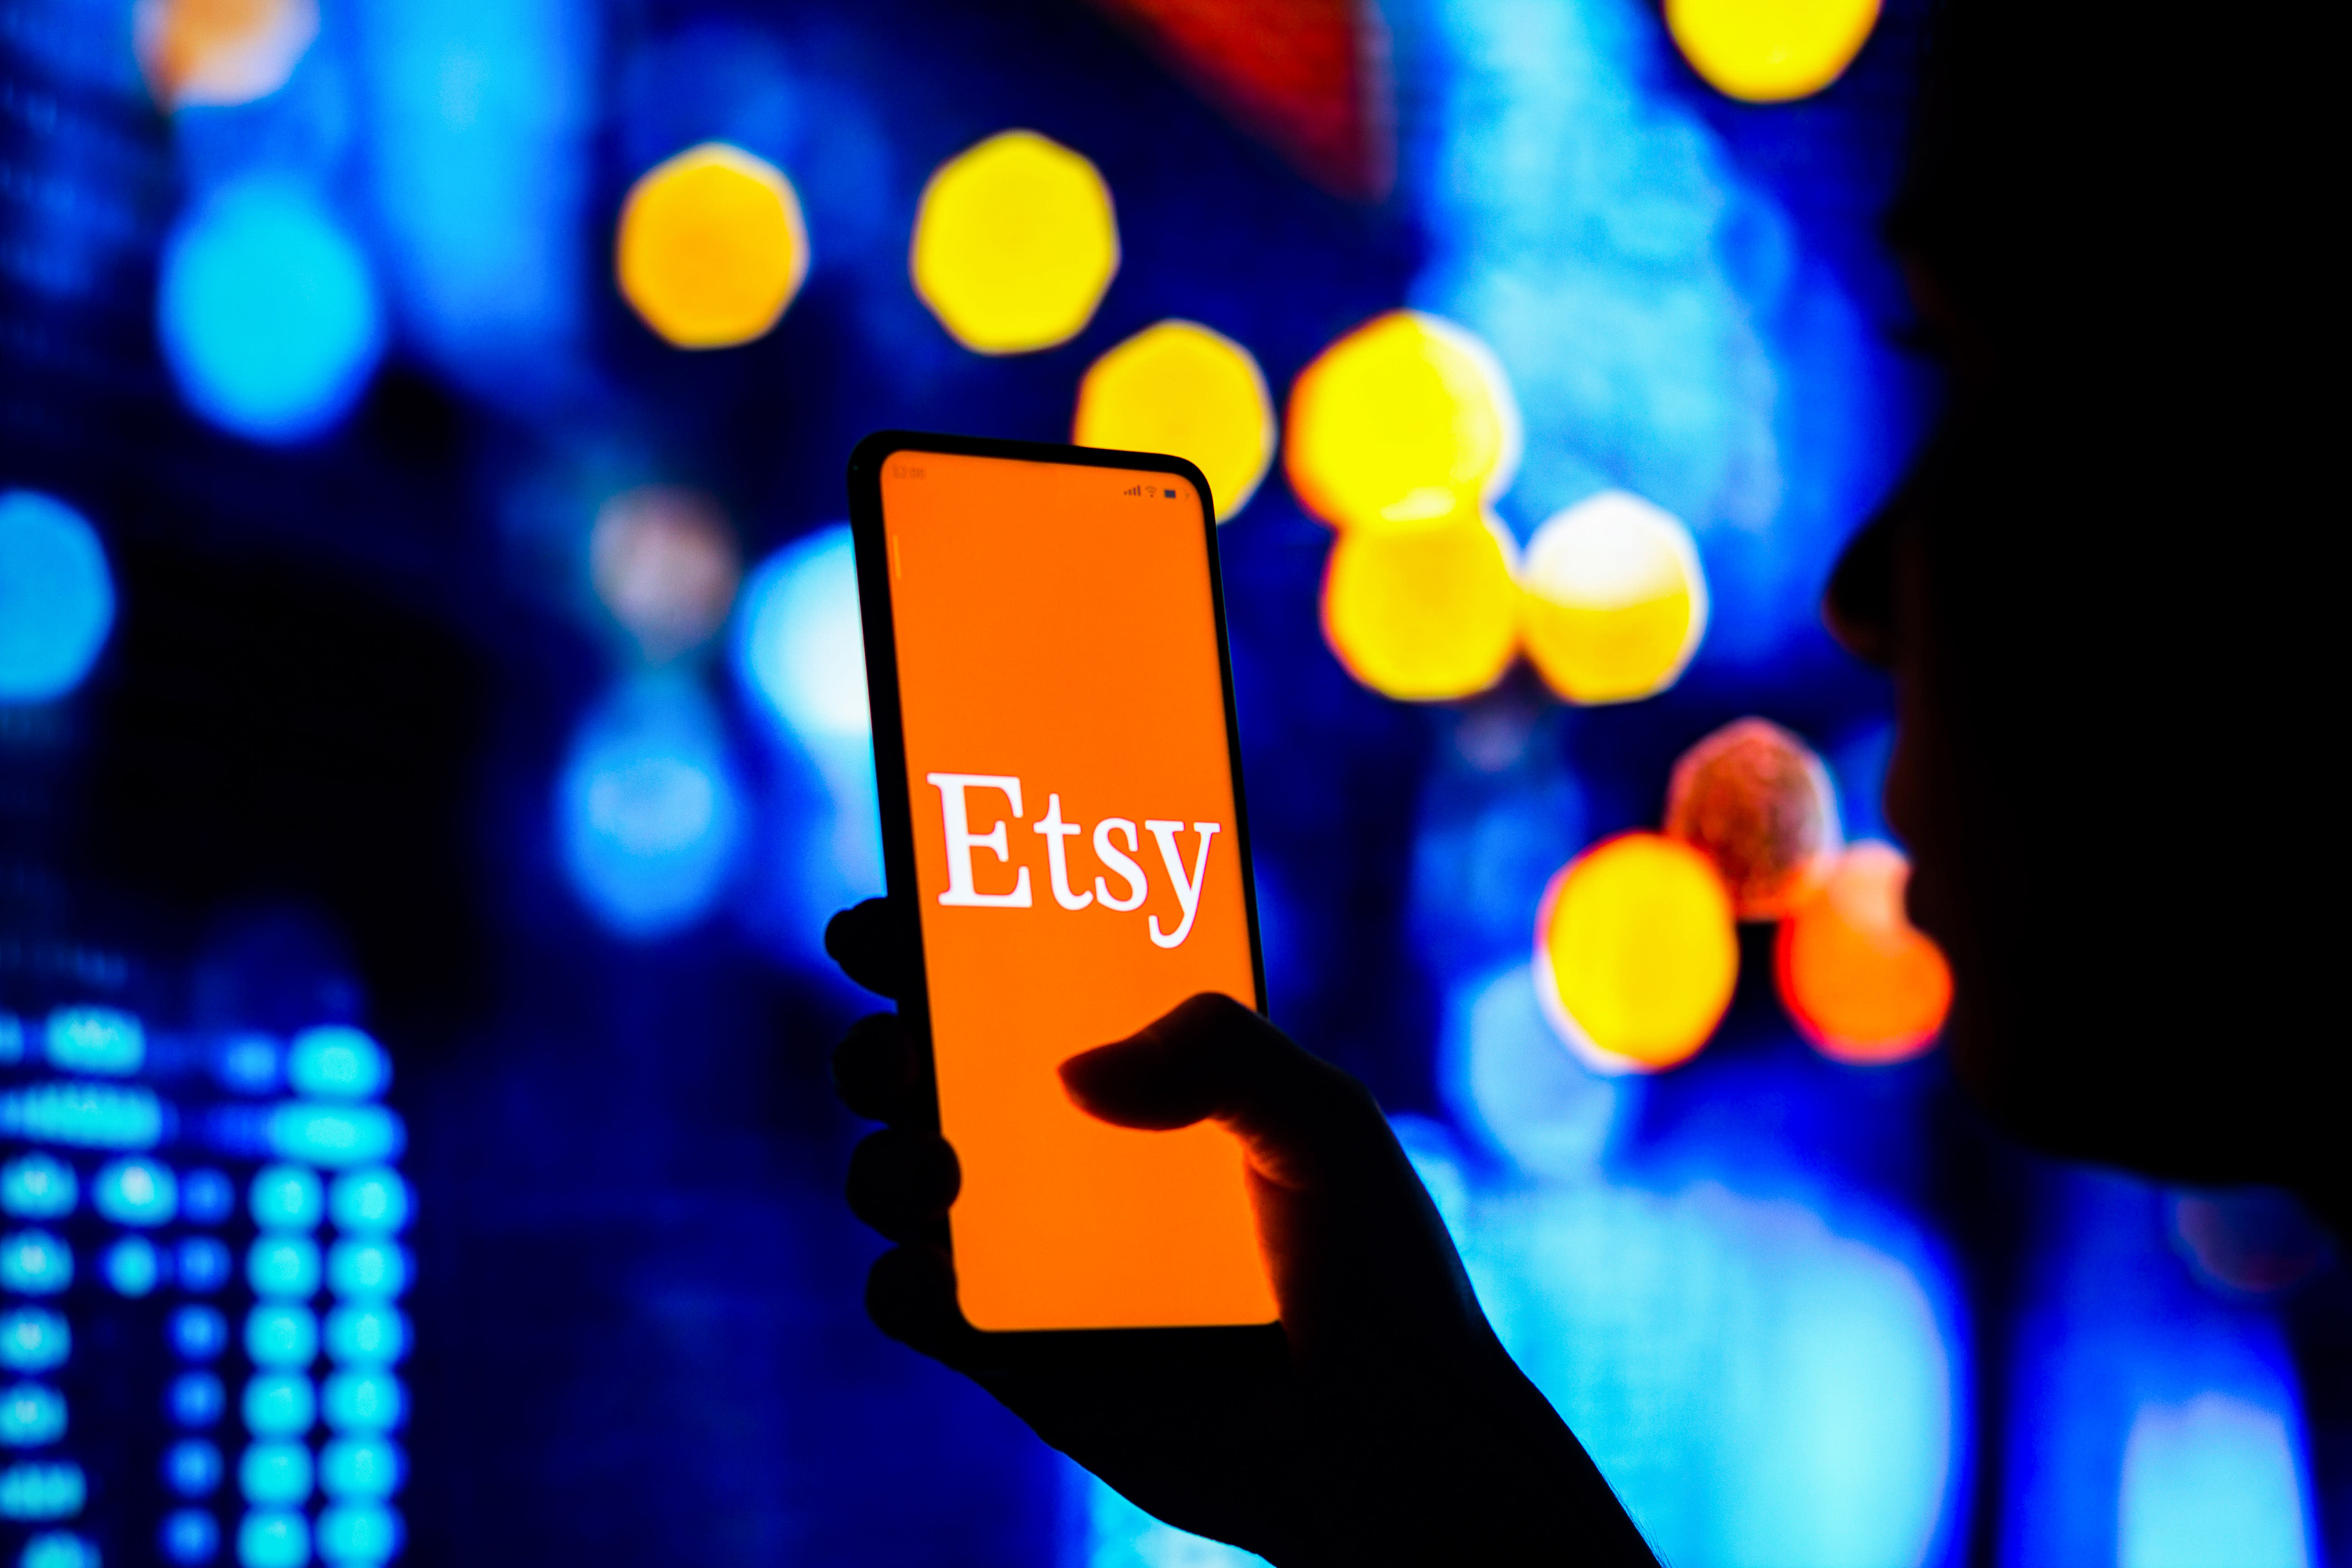 Online marketplaces such as Etsy and Amazon face battles with its sellers over raised fees and have been accused of gouging and ignoring their sellers.